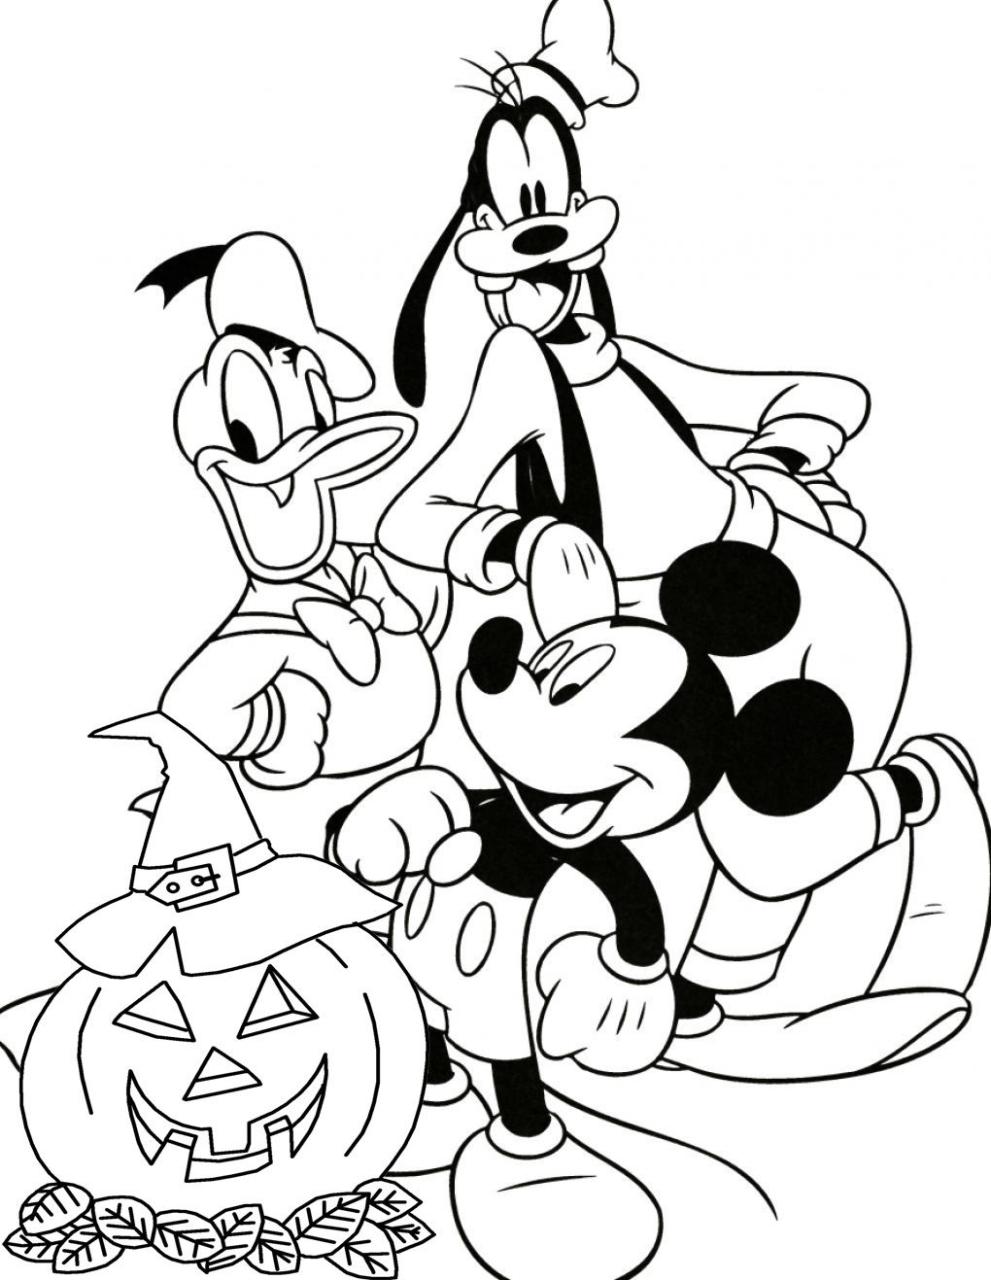 Disney Kids Halloween Coloring Pages